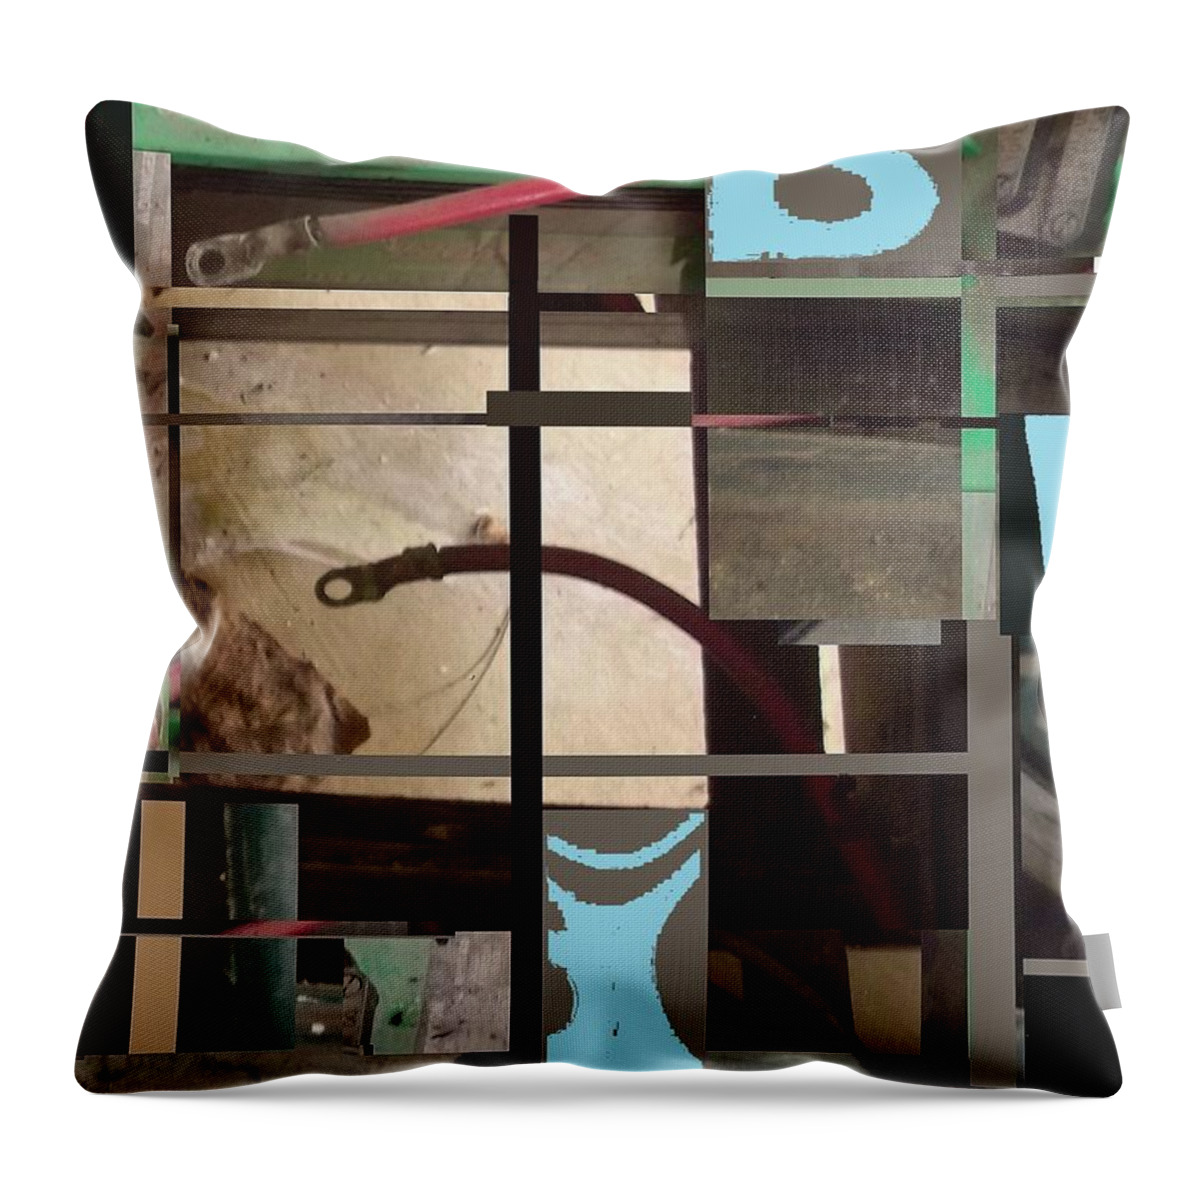 Proscenium Play Scene Throw Pillow featuring the mixed media Stage by Andrew Drozdowicz